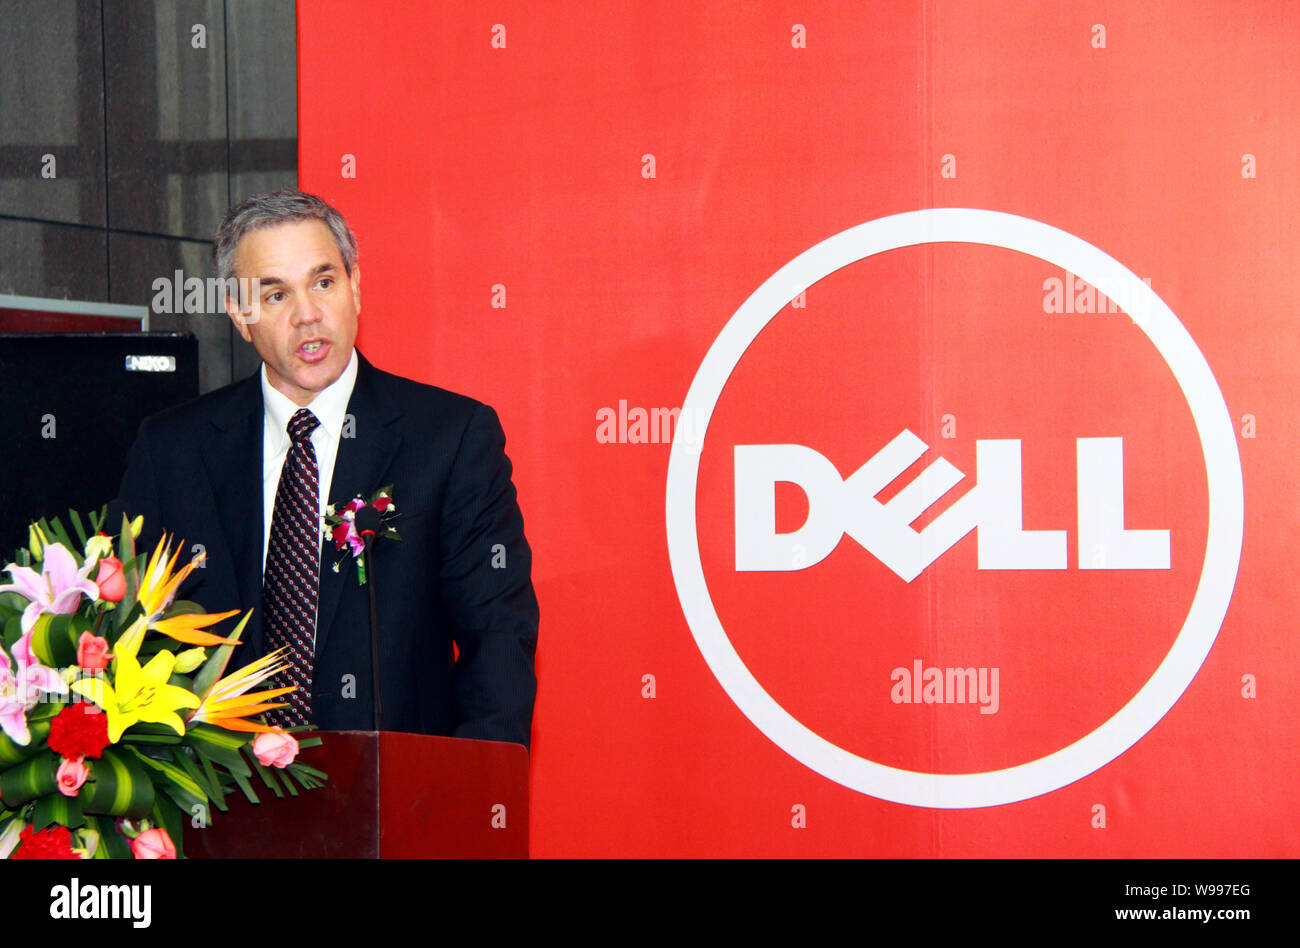 Stephen Felice, Senior Vice President of Dell and President of Consumer, Small and Medium Business of Dell, speaks at the opening ceremony for the Del Stock Photo